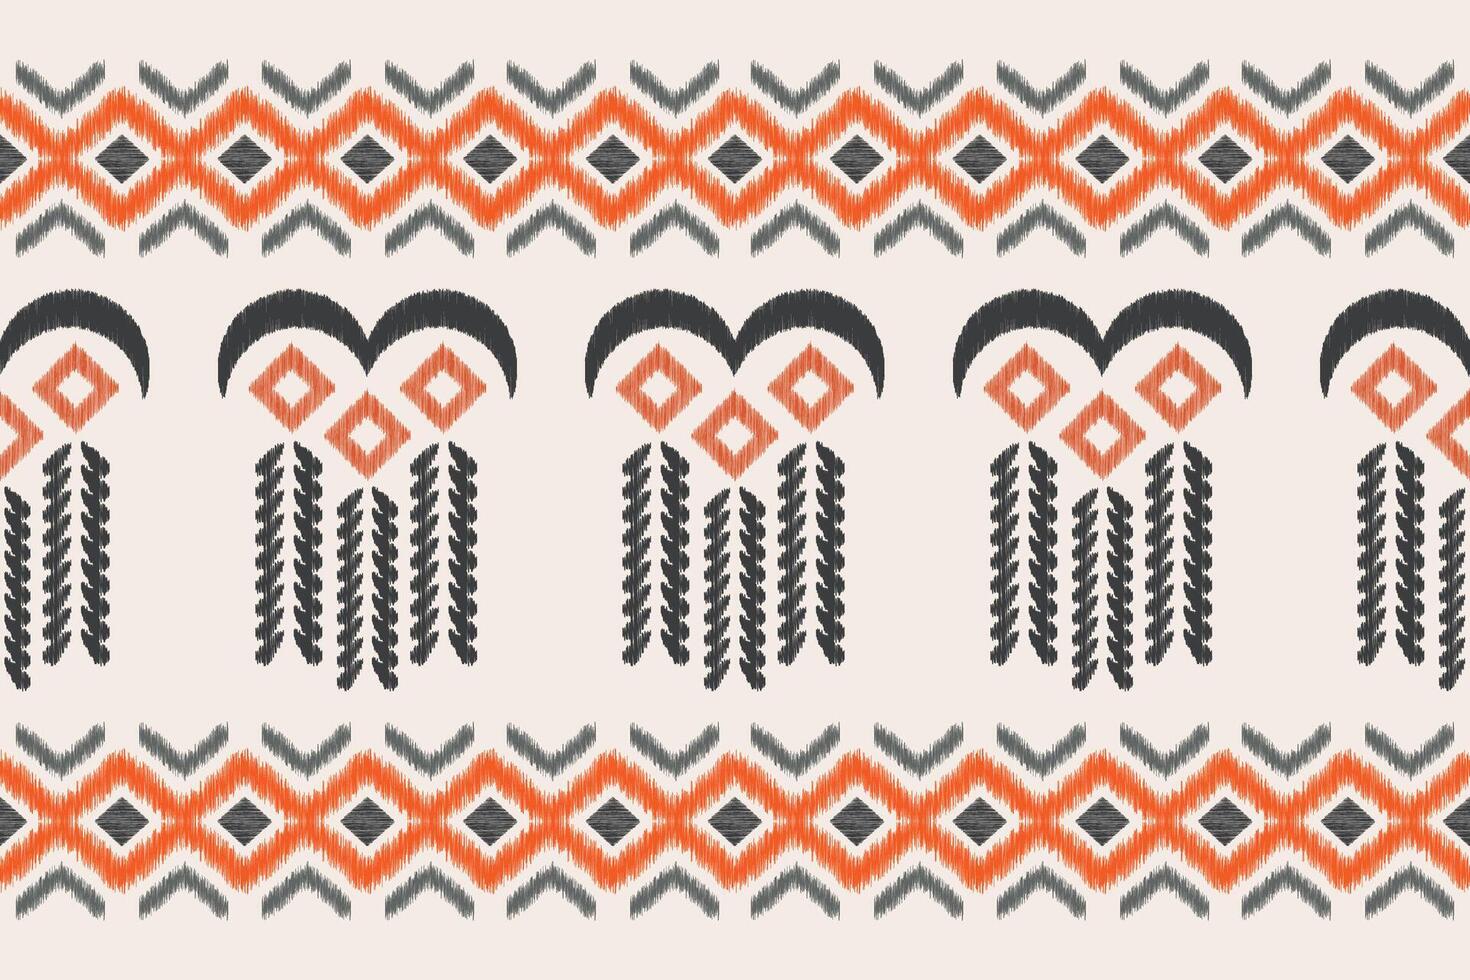 Ethnic Ikat fabric pattern geometric style.African Ikat embroidery Ethnic oriental pattern brown cream background. Abstract,vector,illustration.Texture,clothing,frame,decoration,motif,carpet. vector